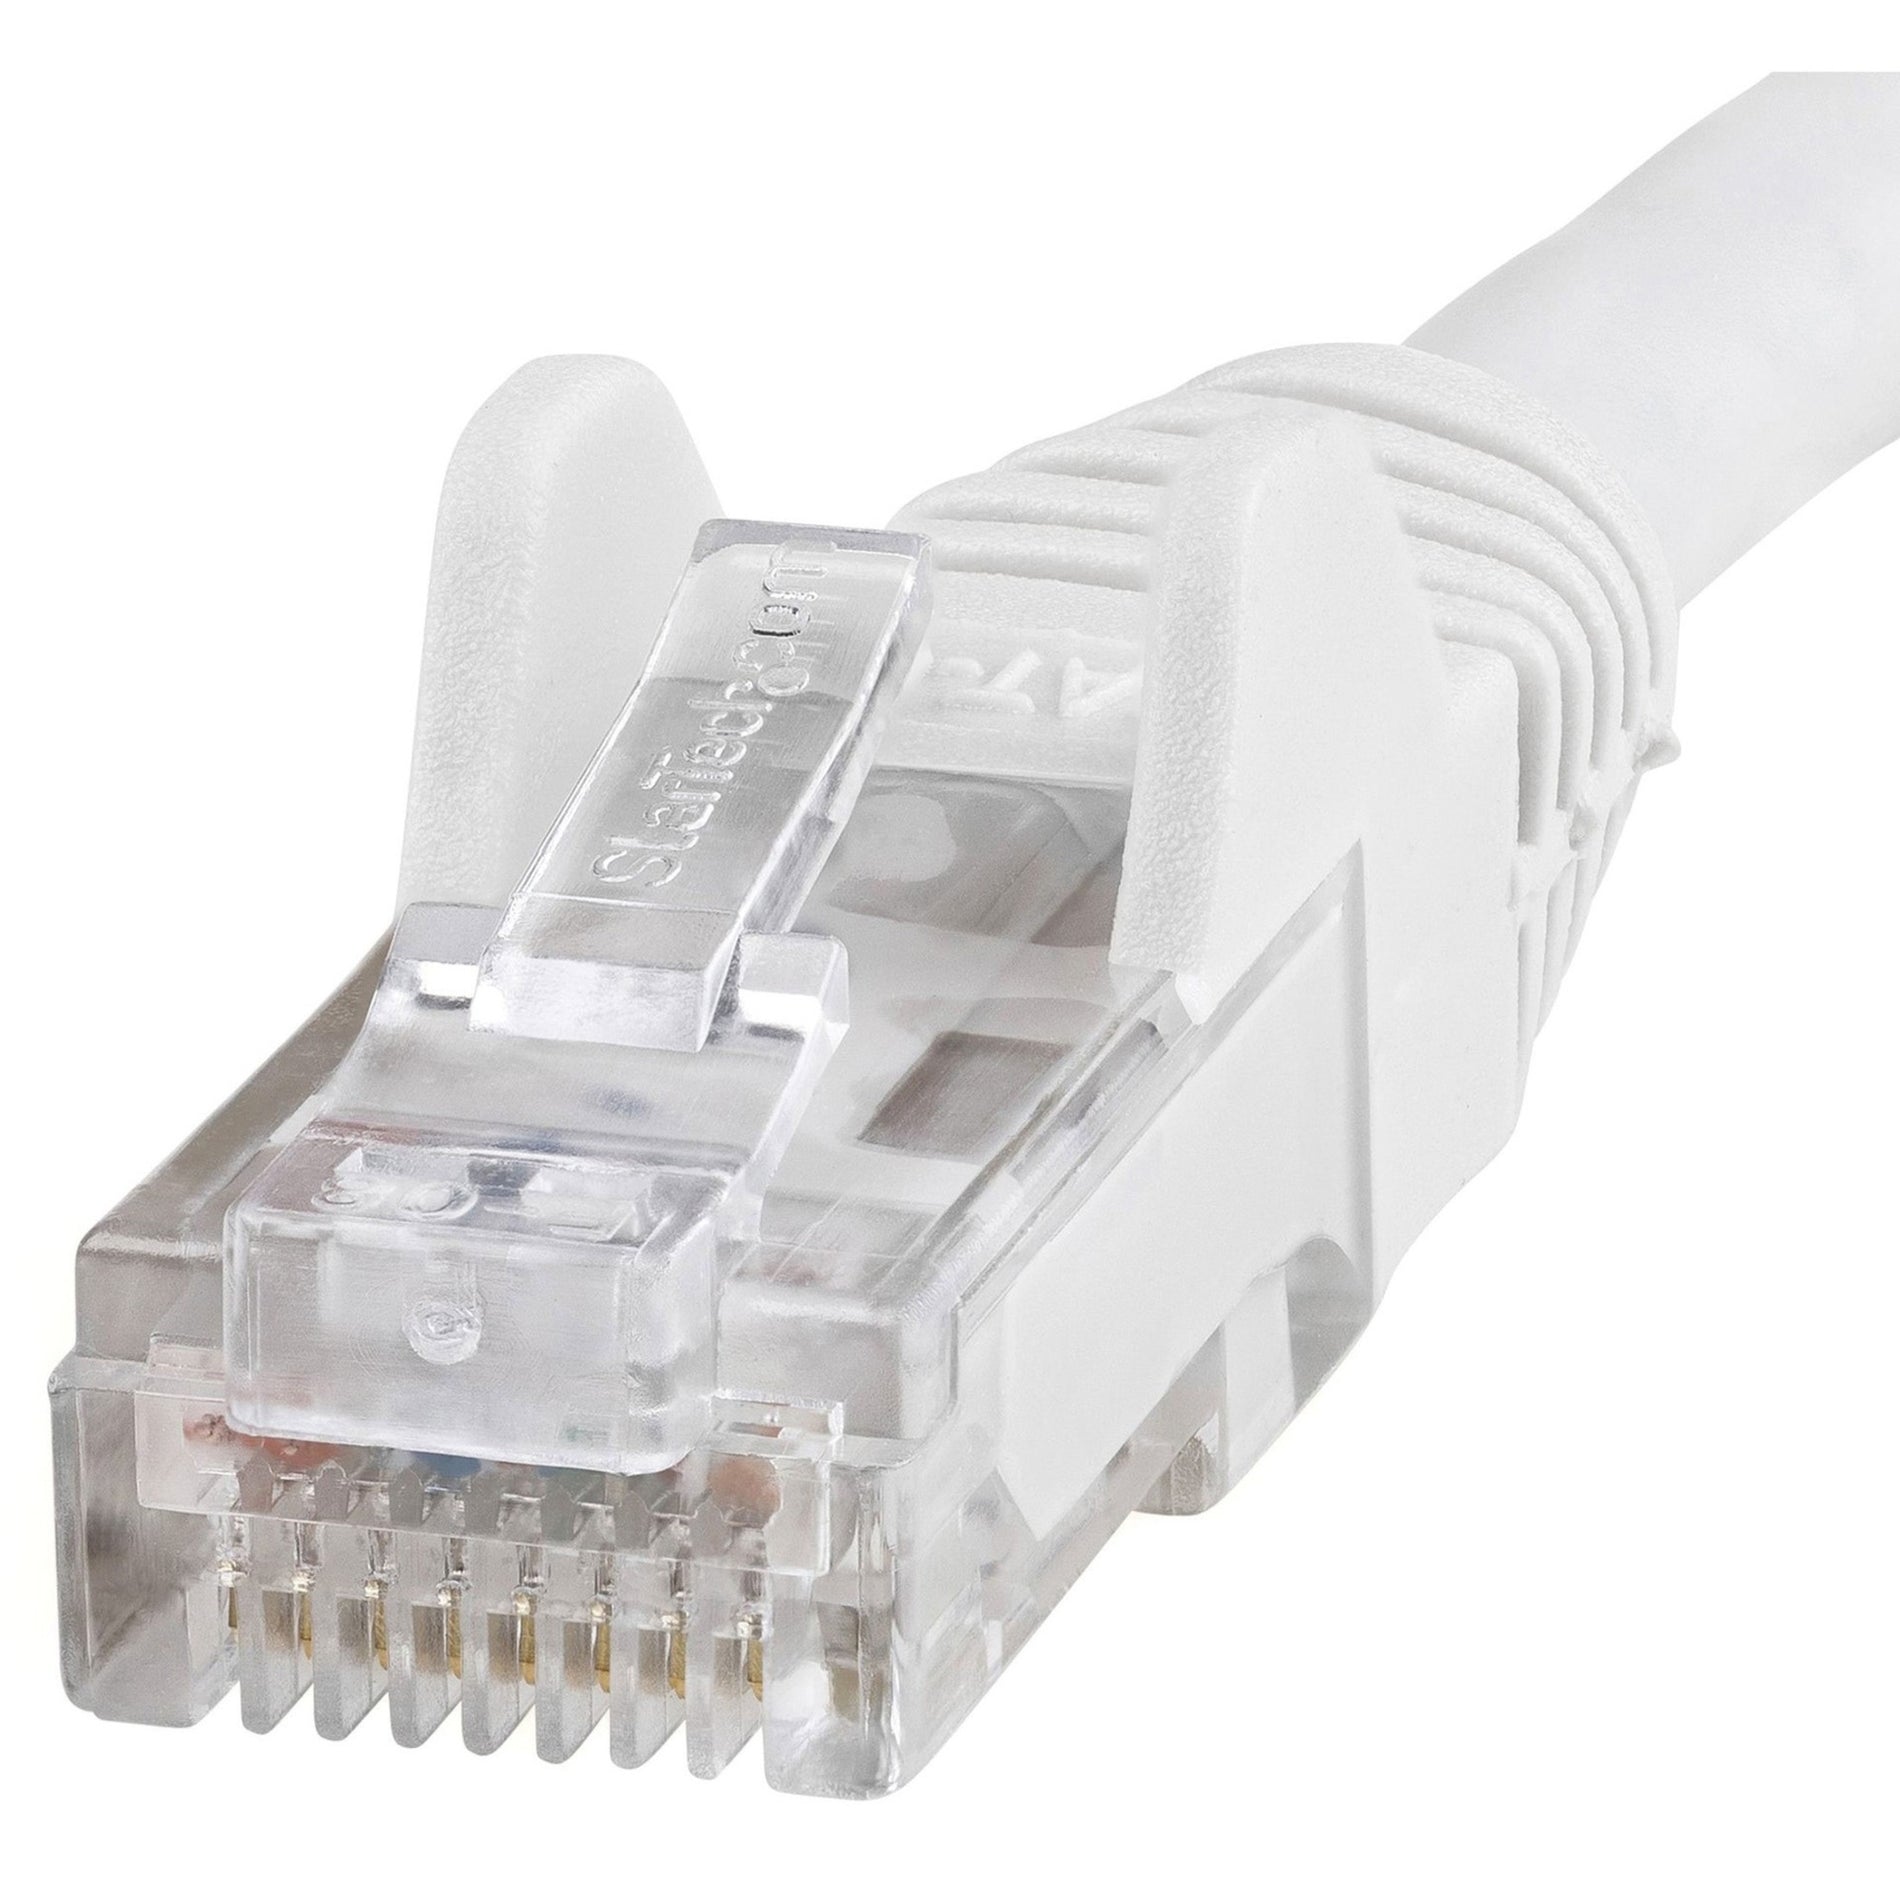 StarTech.com N6PATCH1WH Cat.6 Patch Network Cable, 1ft White Ethernet Cable, Snagless RJ45 Connectors